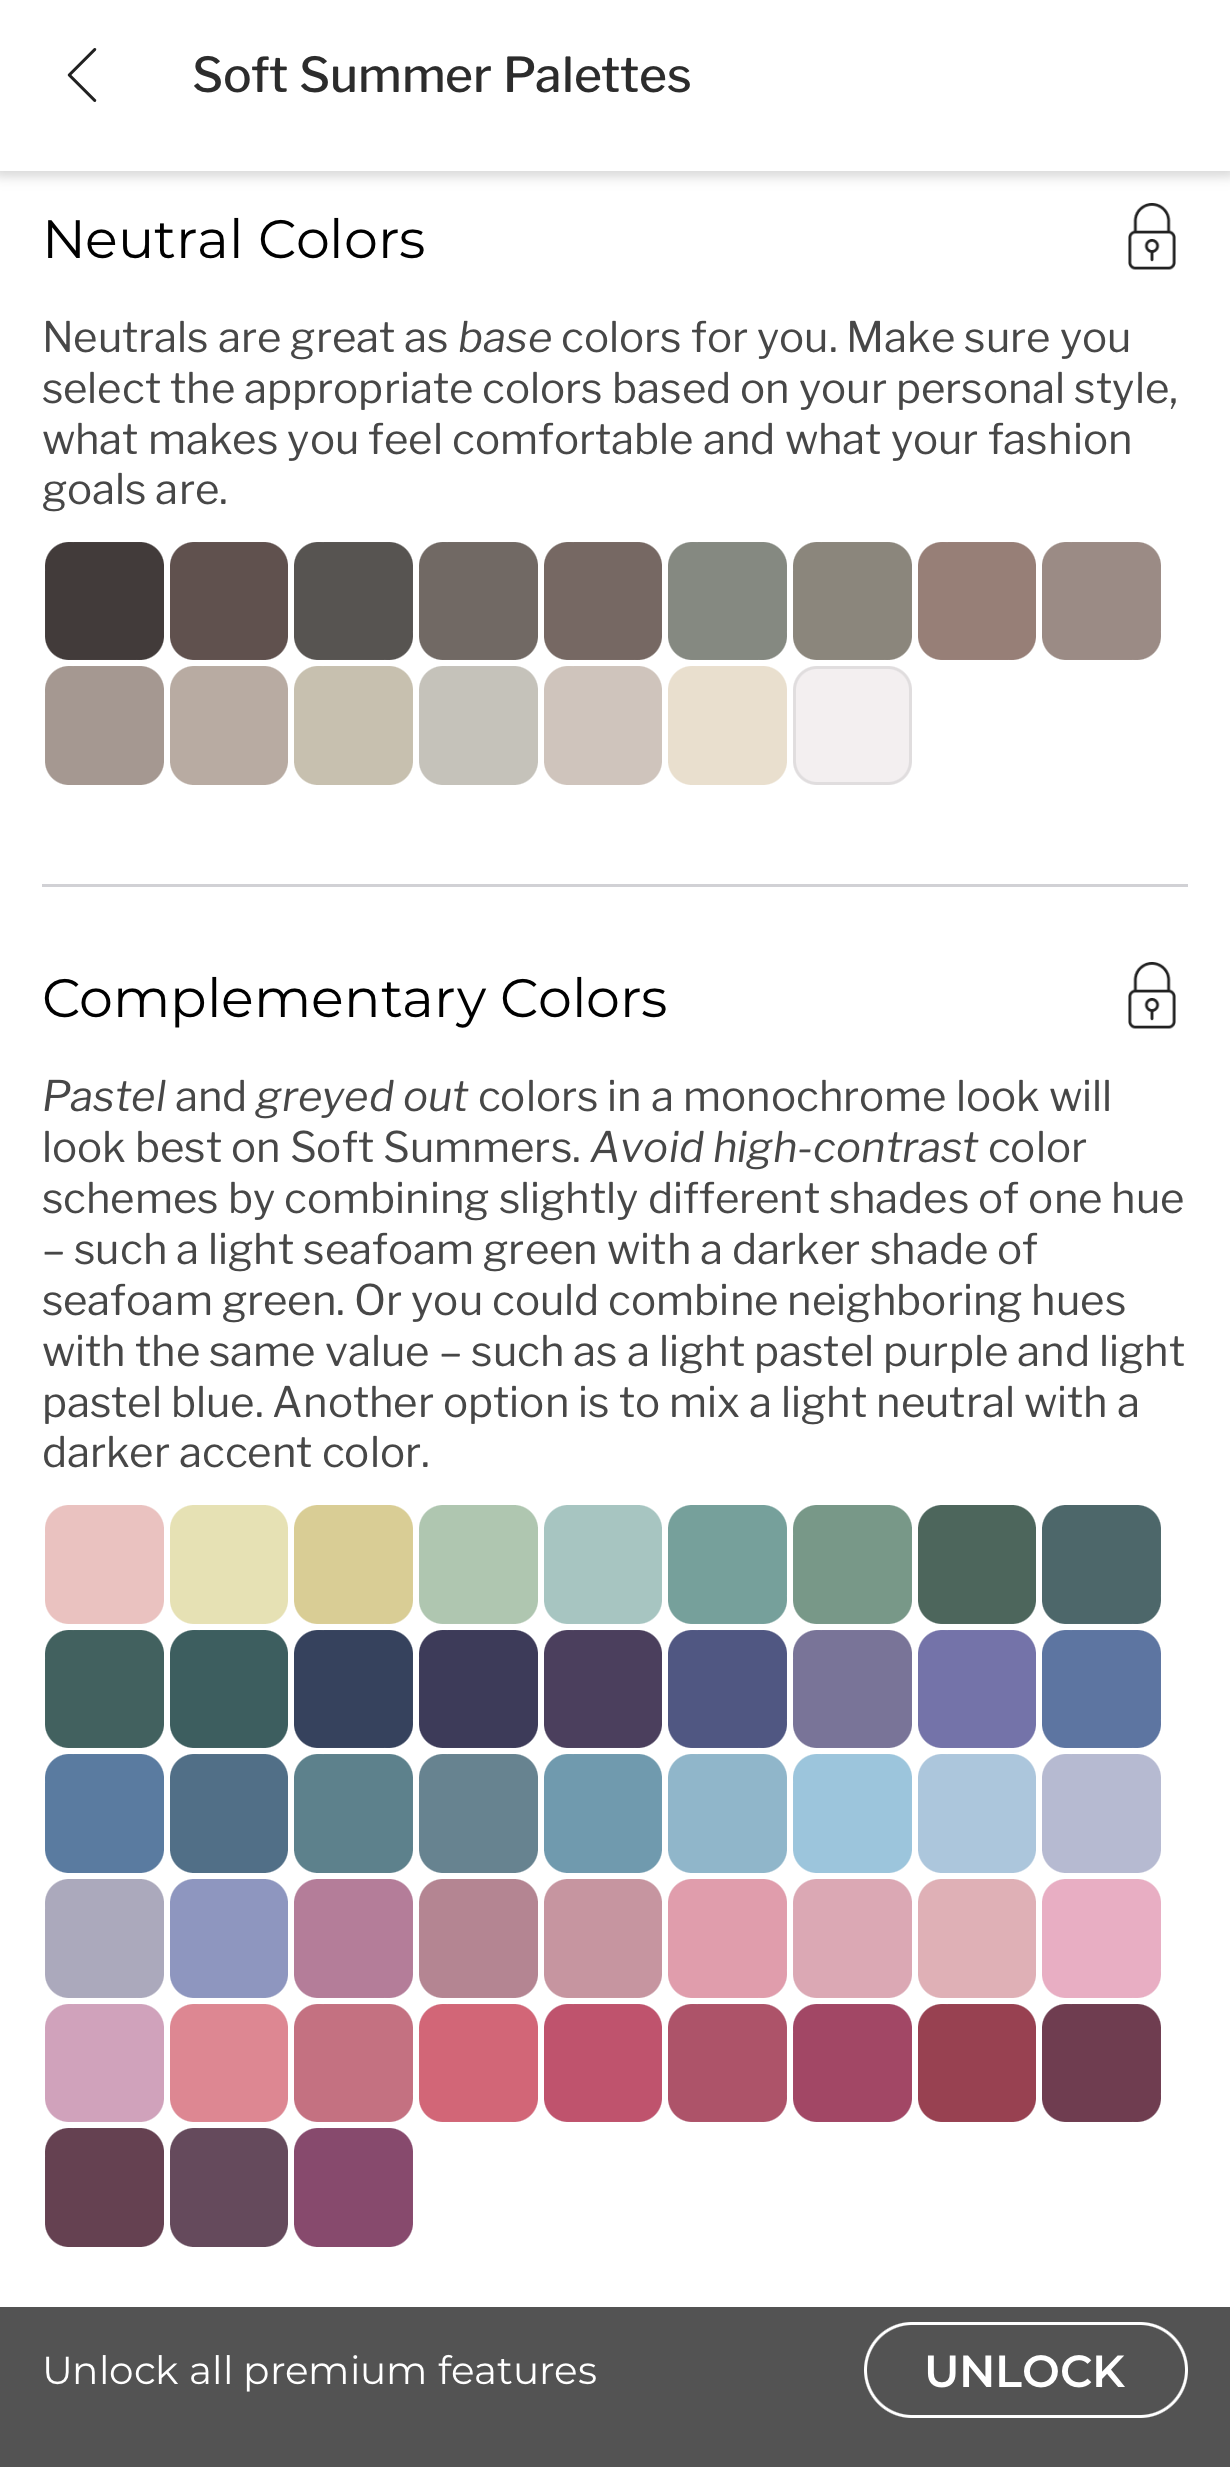 Color Analysis helps you look your absolute best.